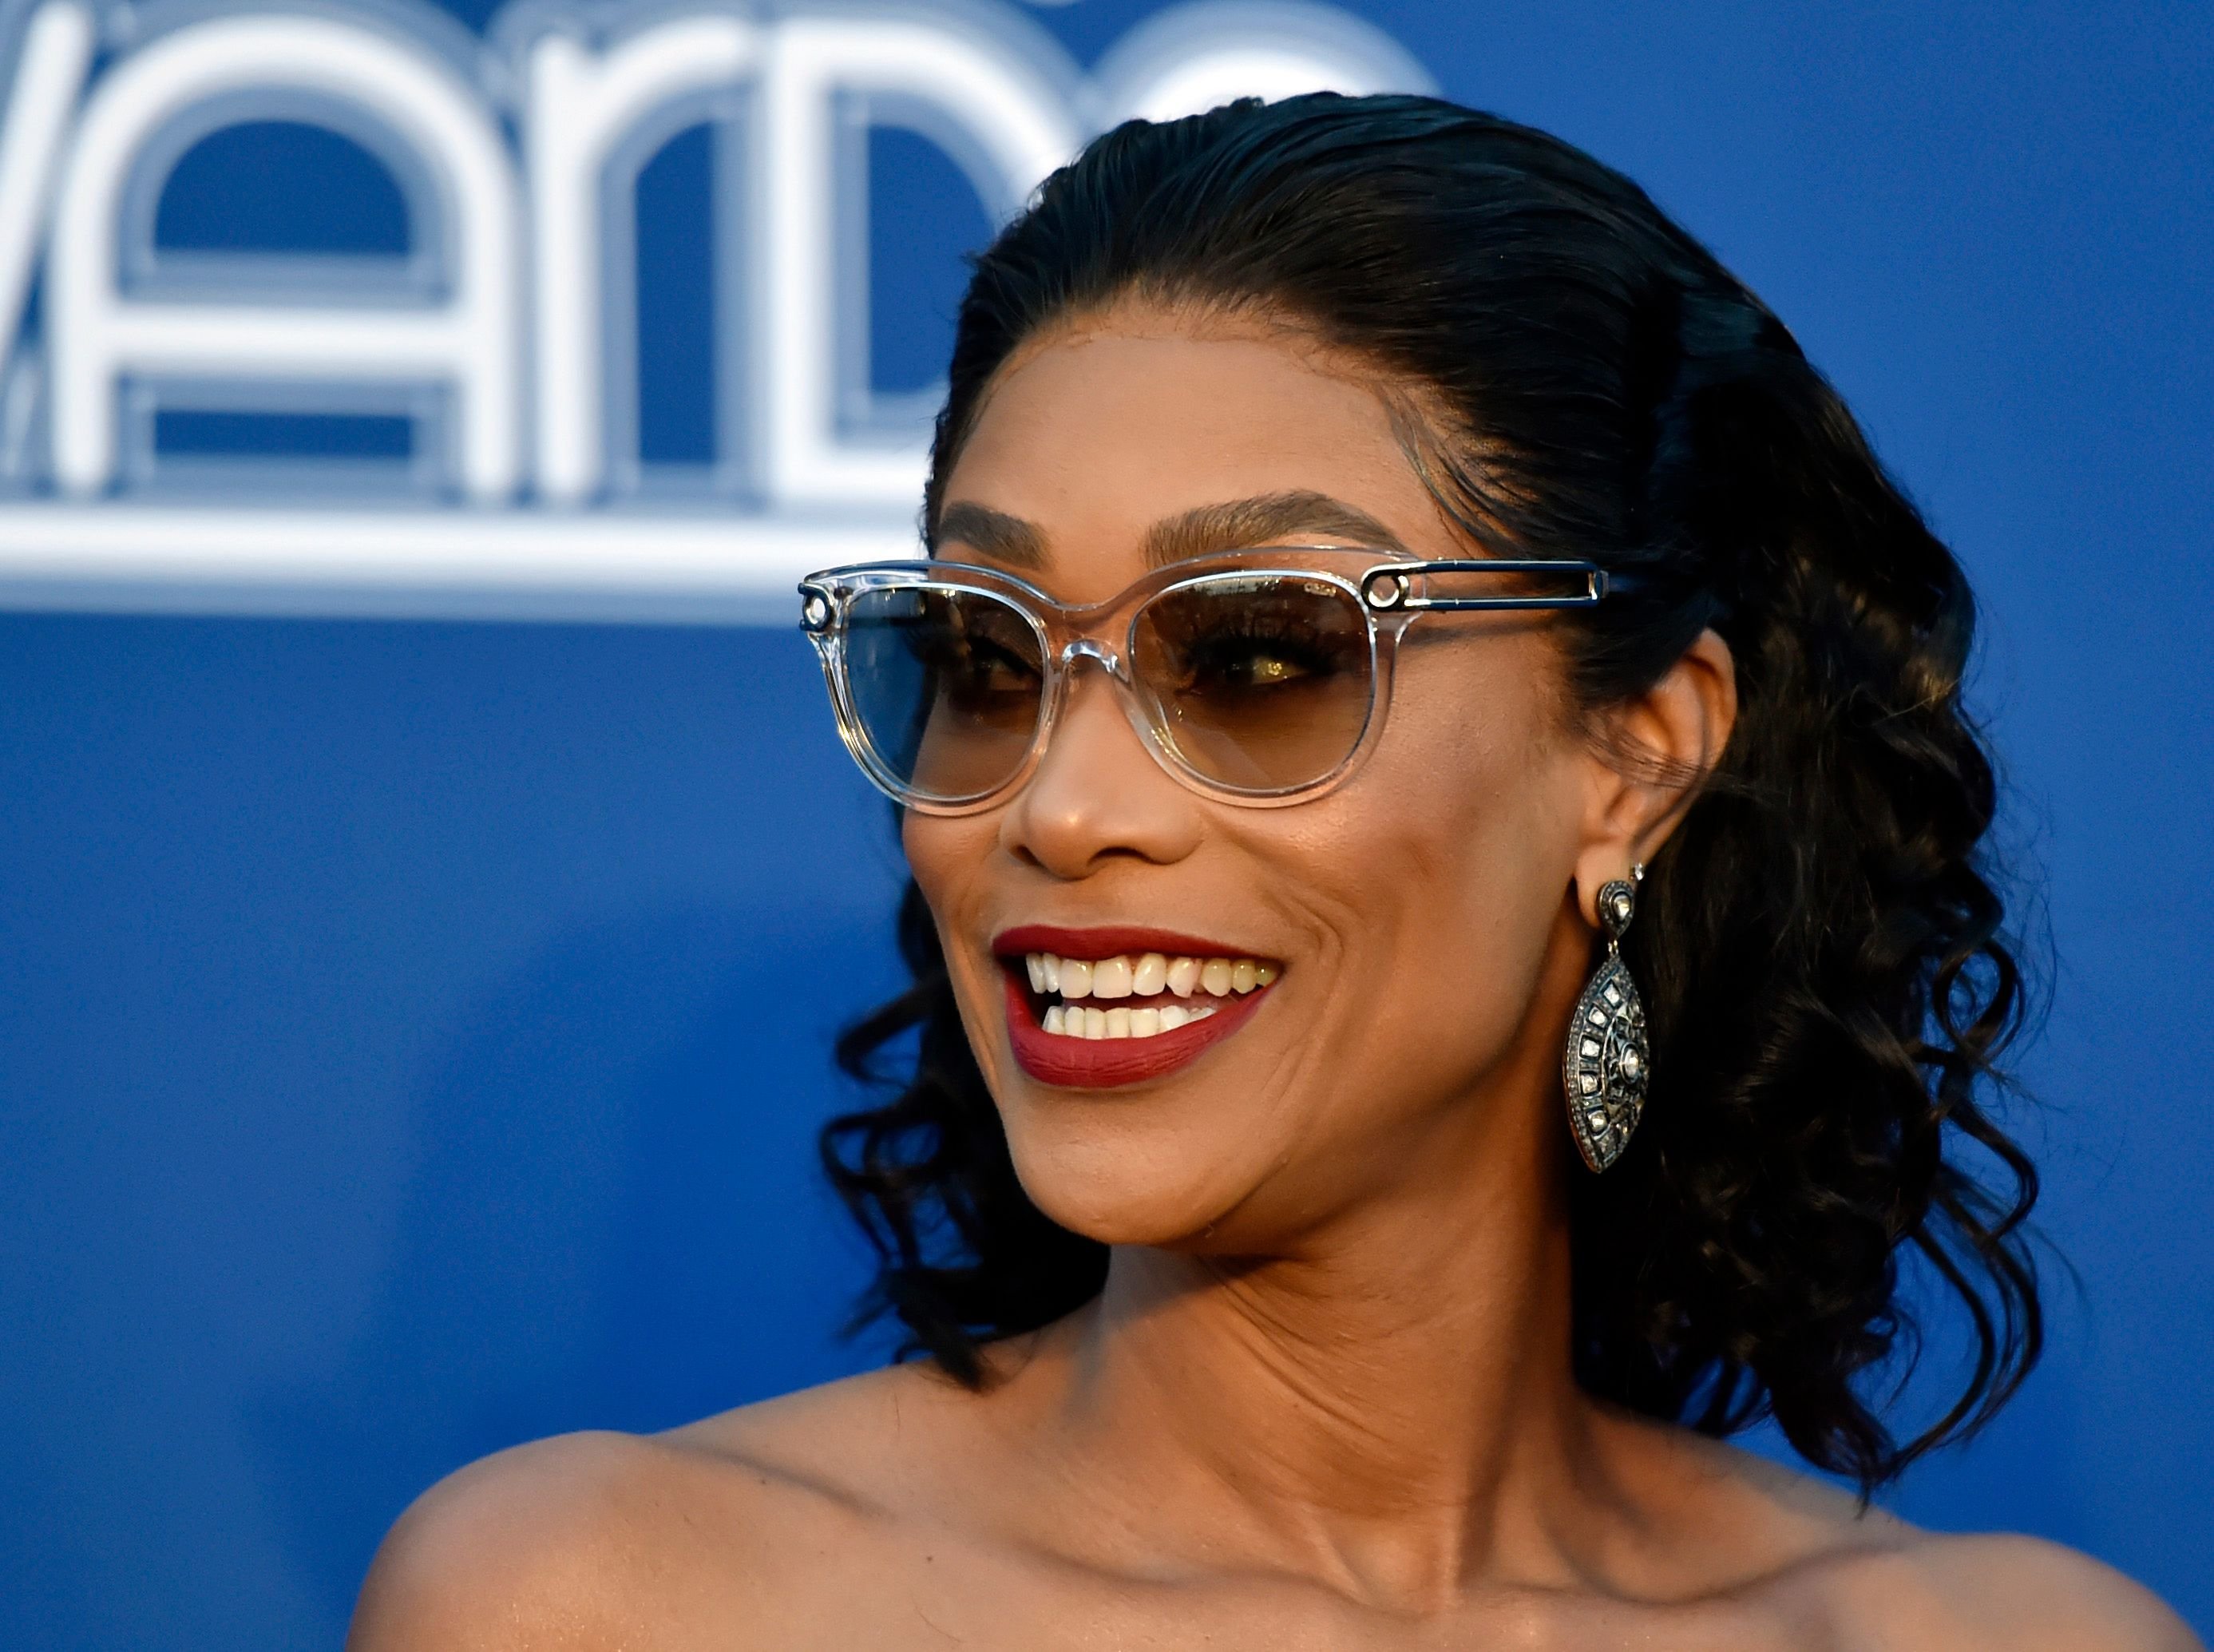 Tami Roman attends the 2018 Soul Train Awards at the Orleans Arena on November 17, 2018 in Las Vegas, Nevada. | Source: Getty Images